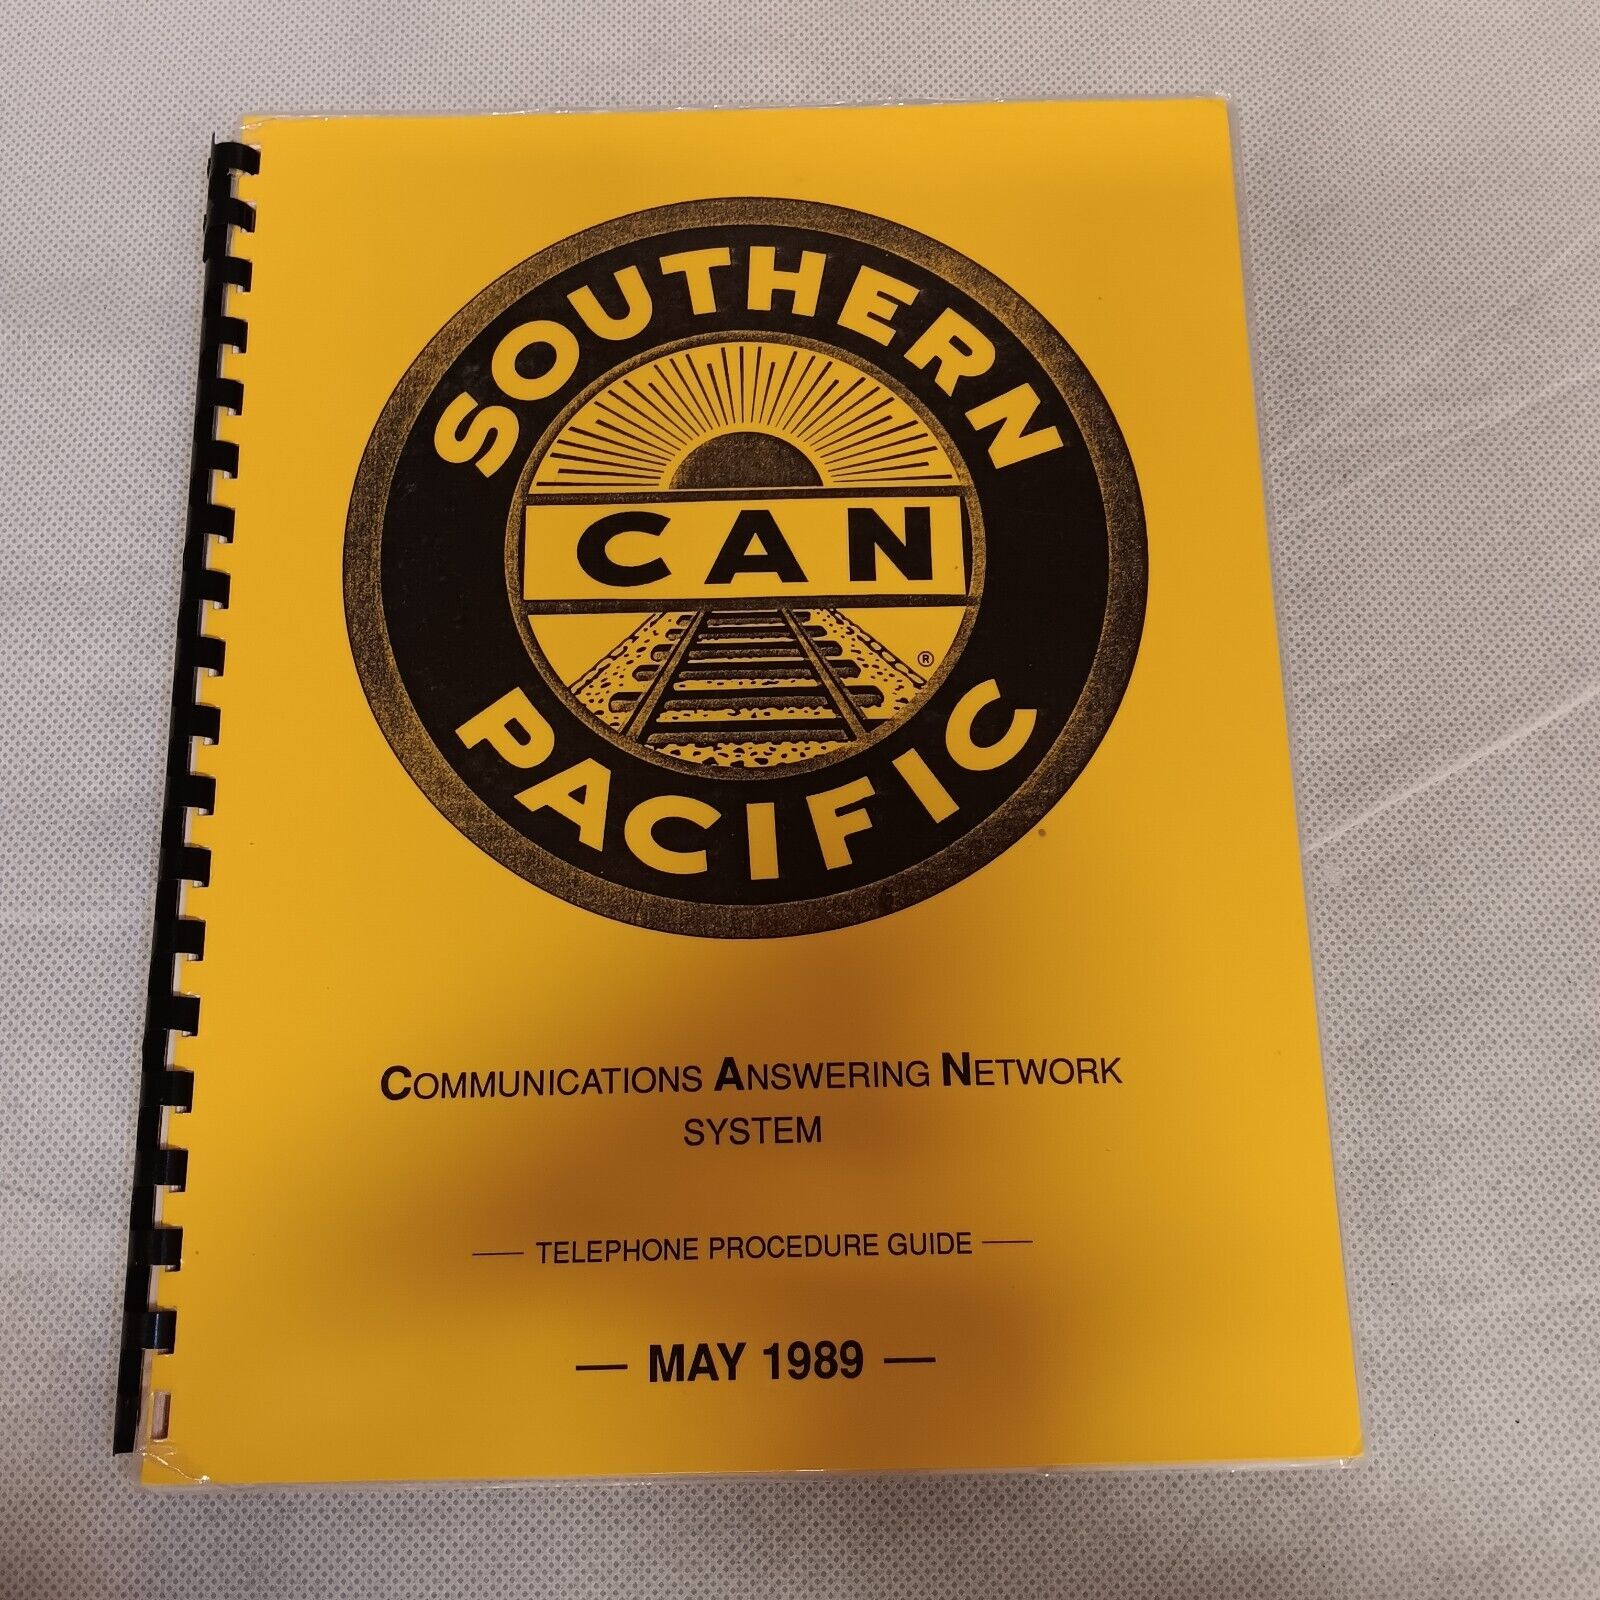 Southern Pacific Railroad Telephone Procedure Guide